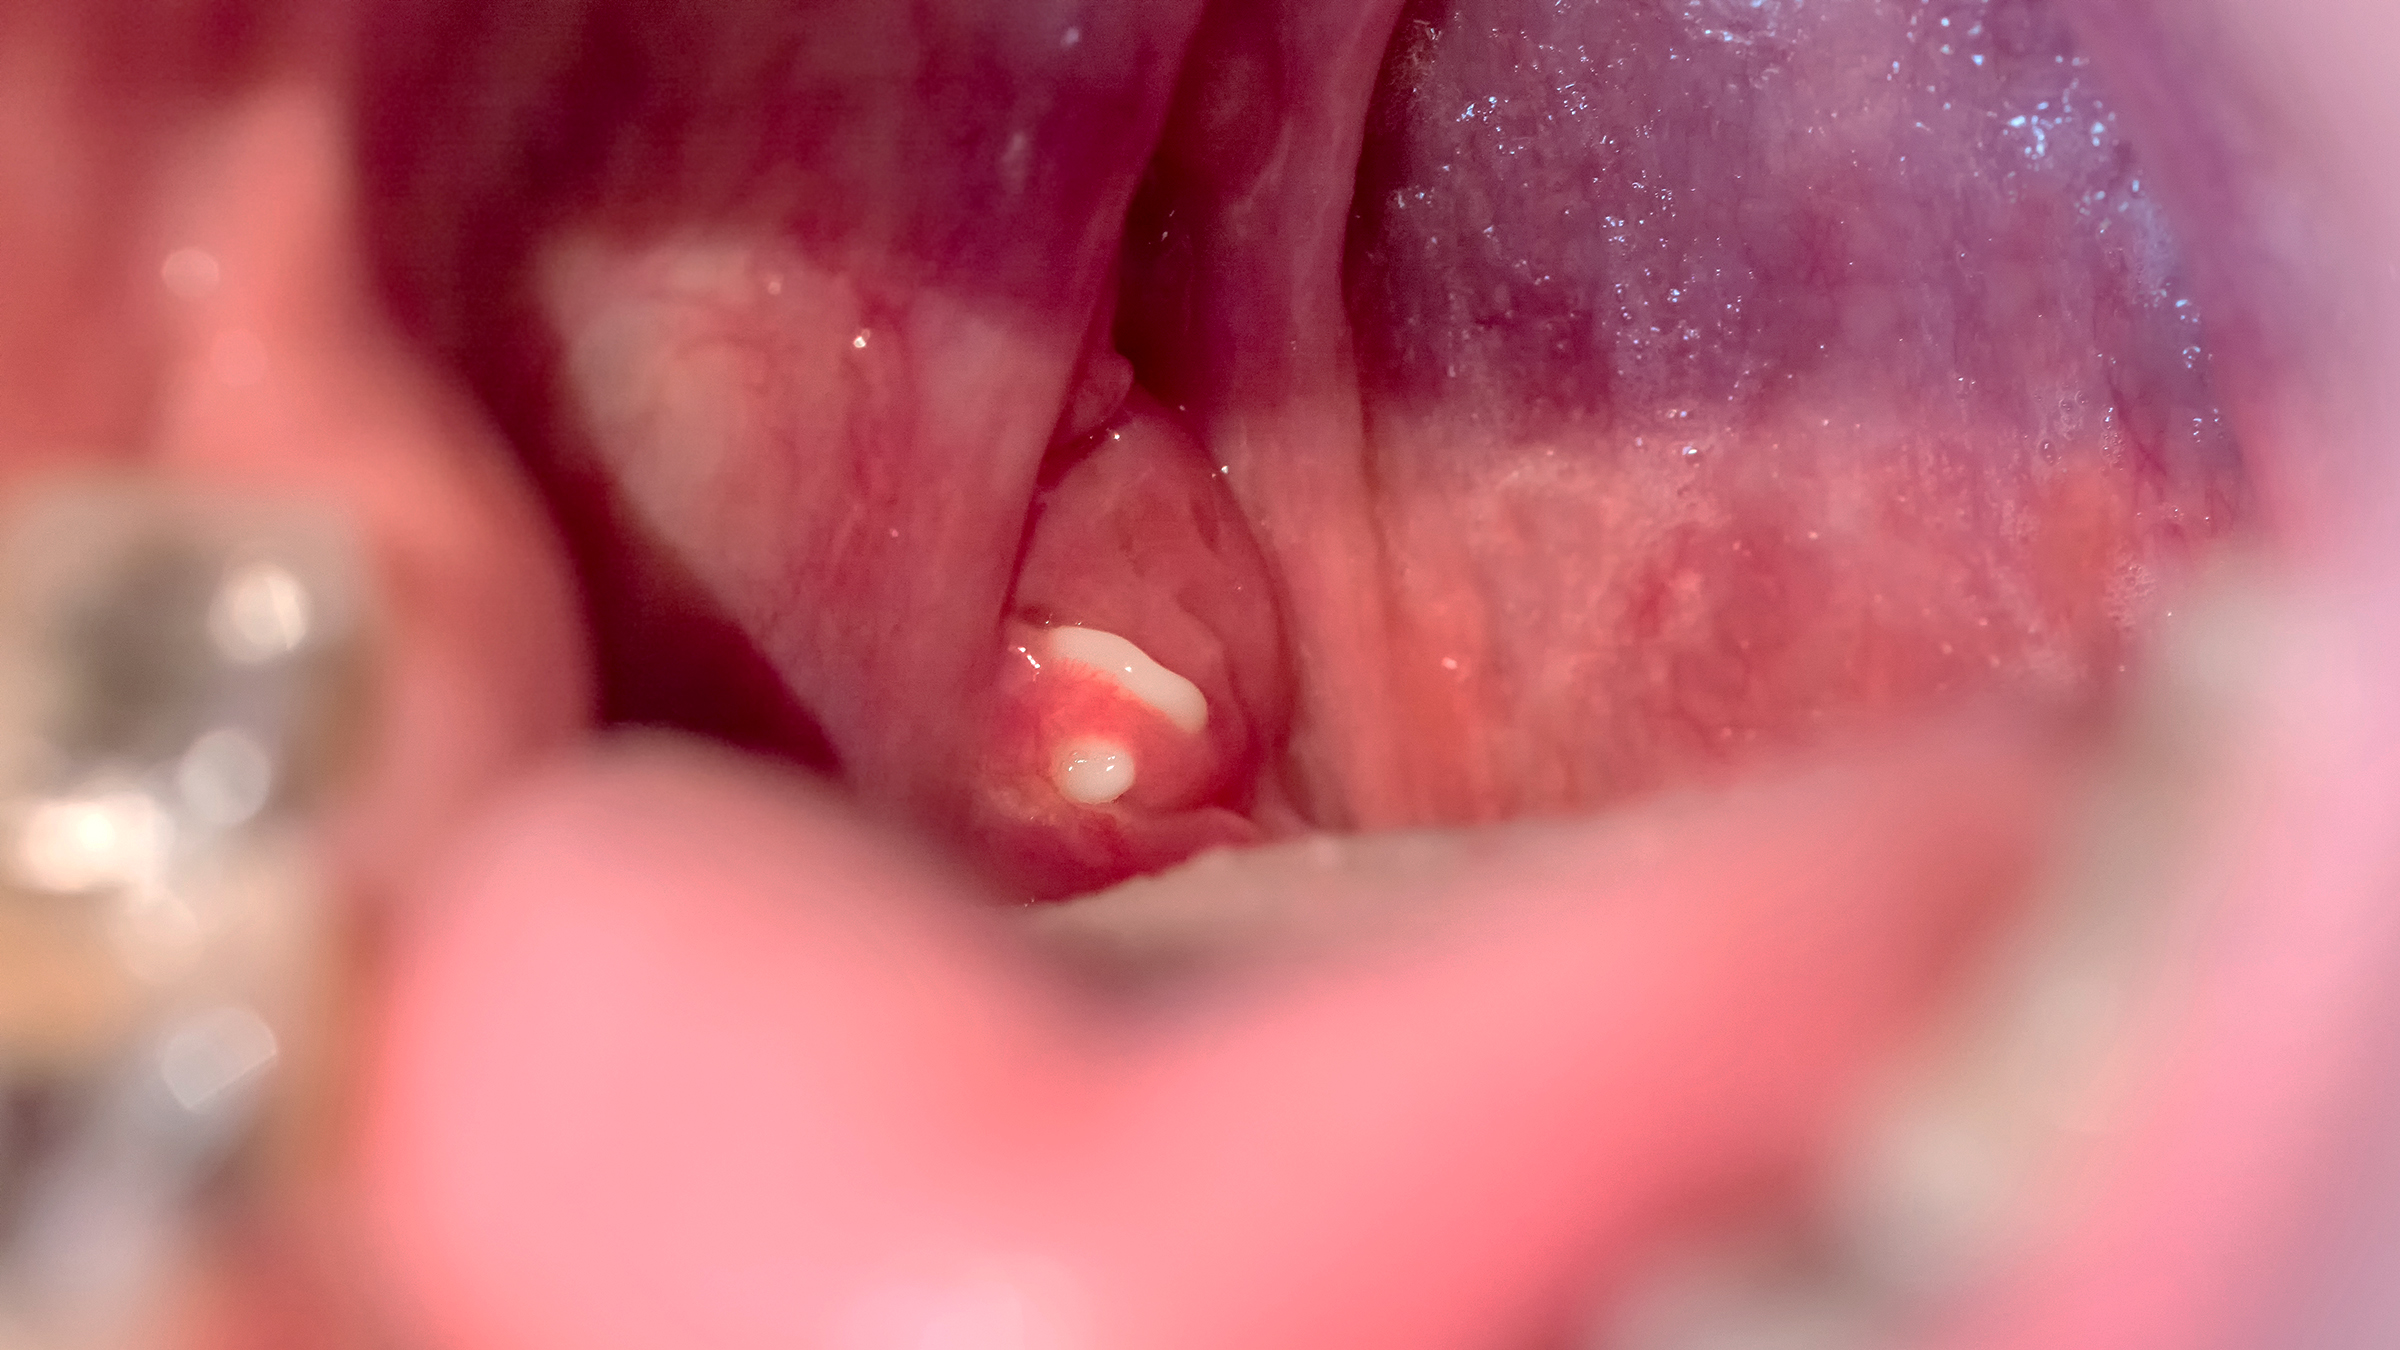 How to Get Rid of Tonsil Stones and Keep Them From Coming Back - GoodRx